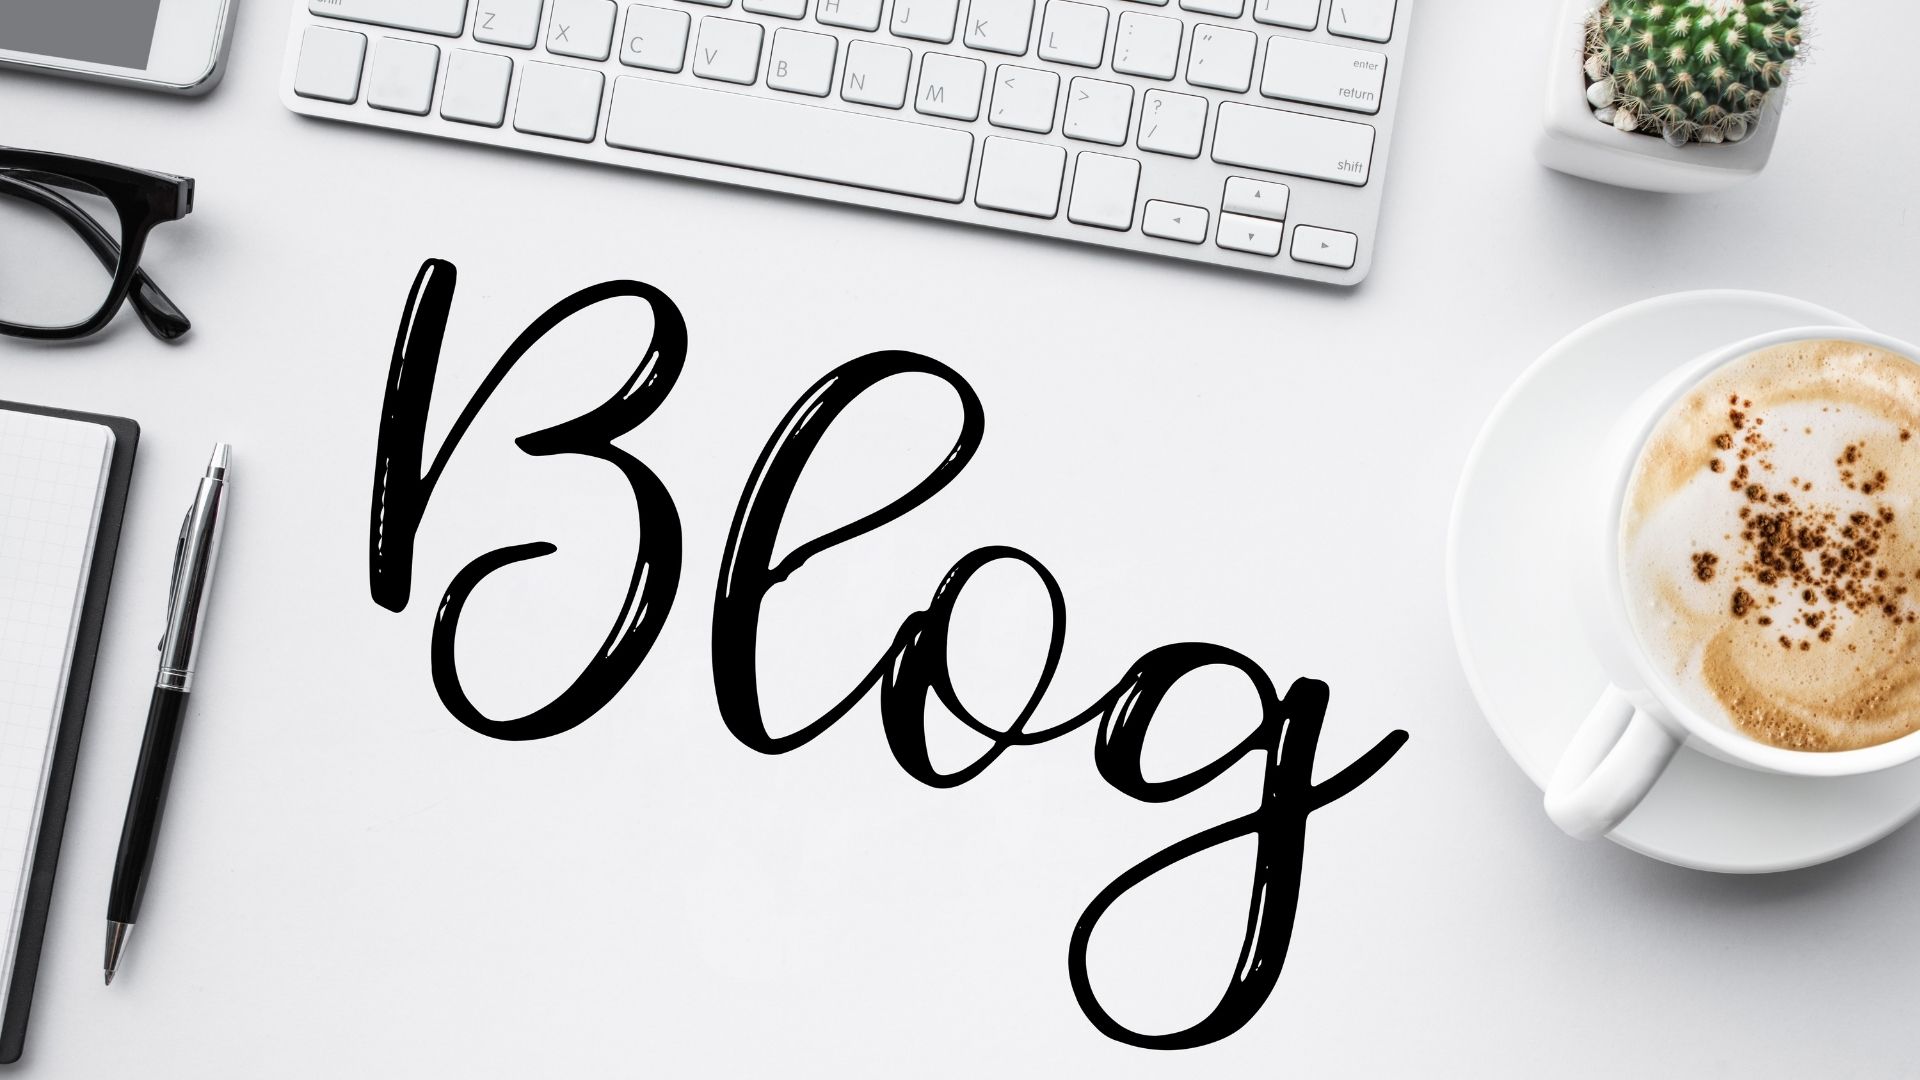 A company blog improves your SEO and client relations. It has great marketing opportunities, too!